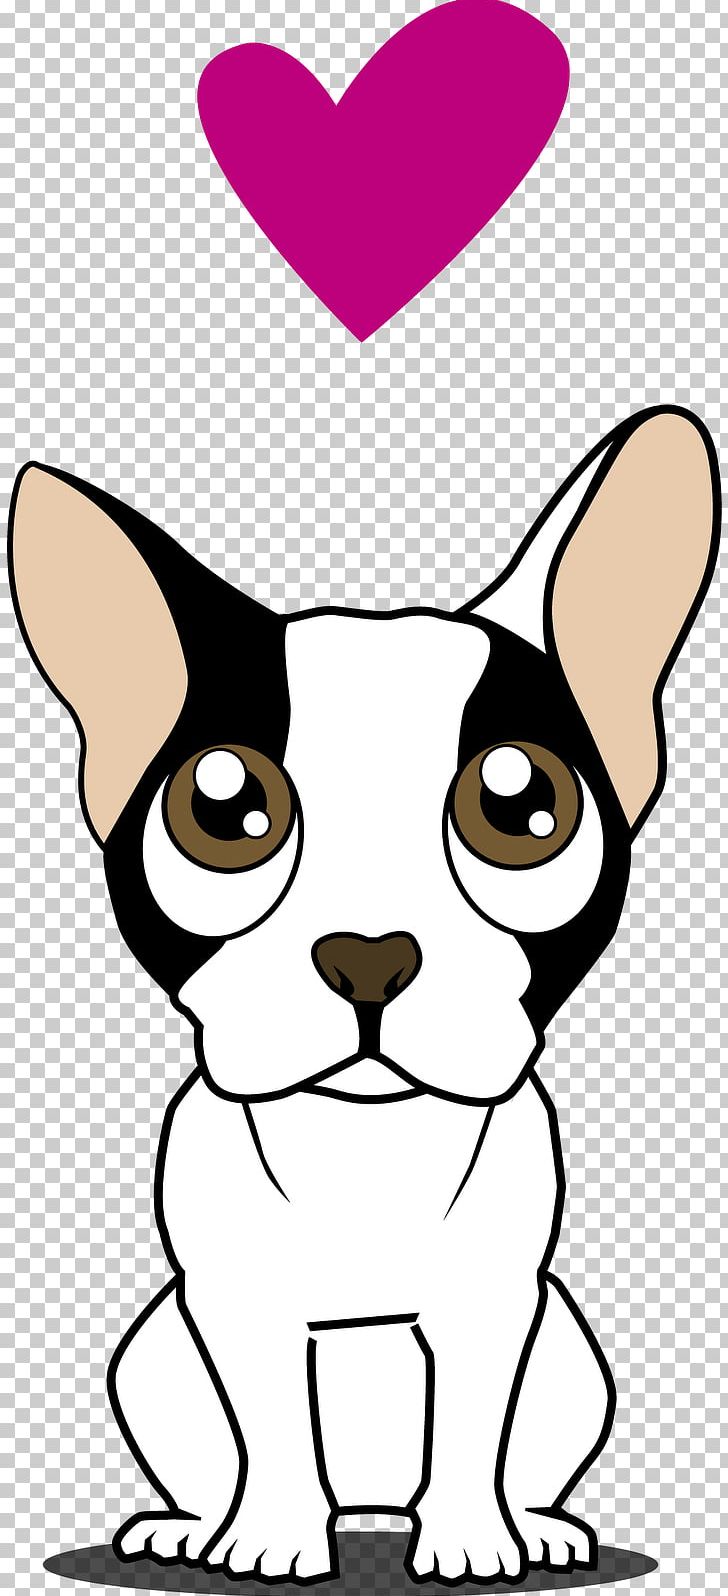 French Bulldog Puppy Pug Dog Breed PNG, Clipart, Animal, Animals, Artwork, Black, Black And White Free PNG Download